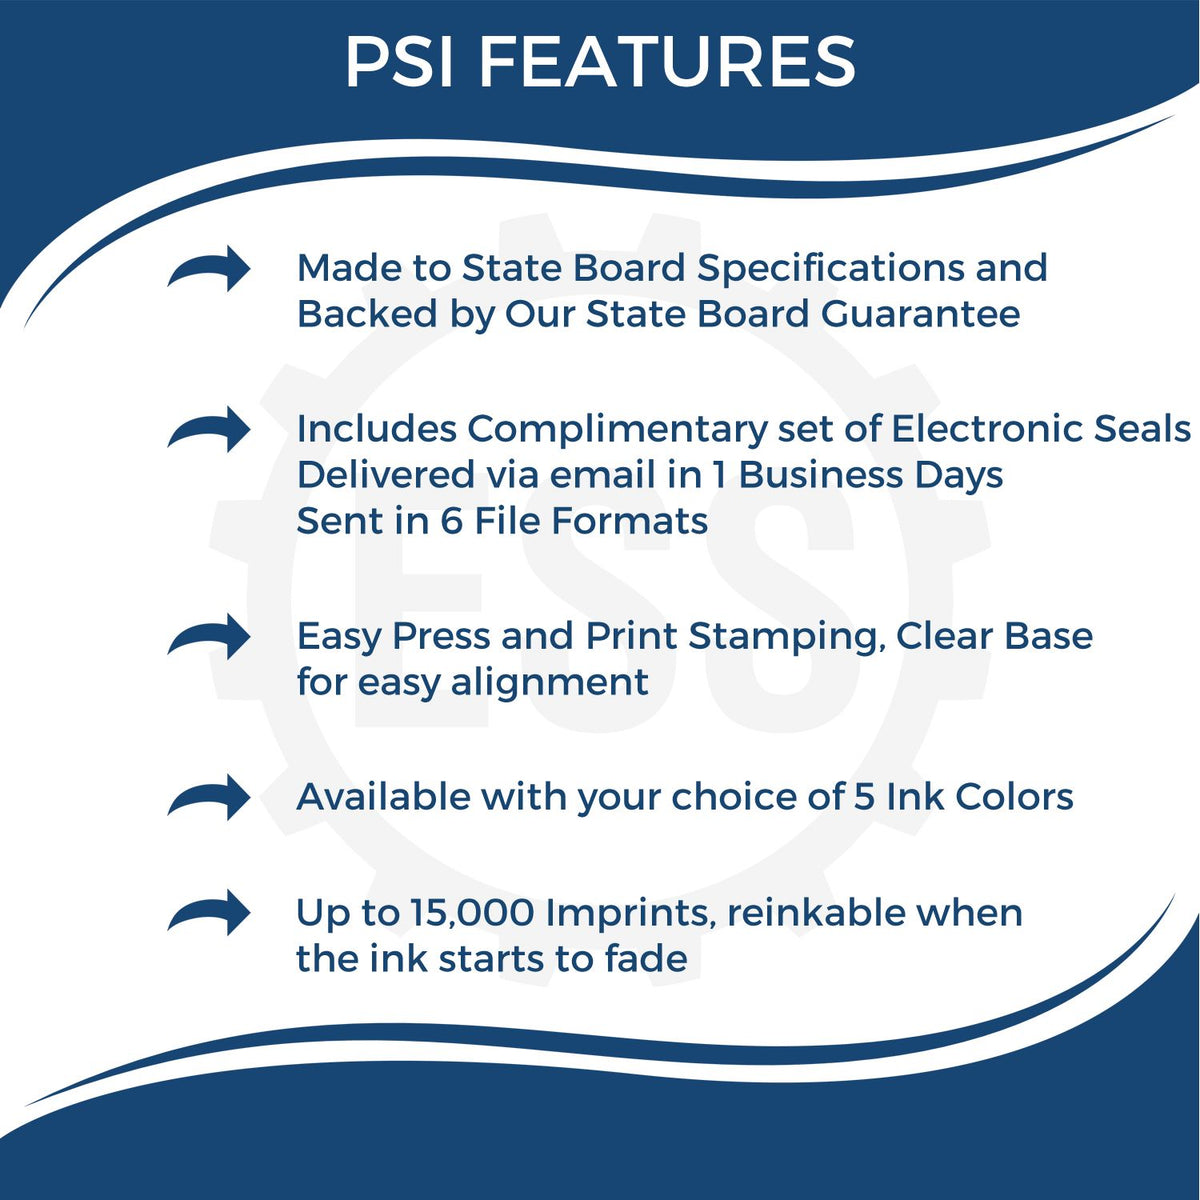 A picture of an infographic highlighting the selling points for the PSI Maryland Notary Stamp